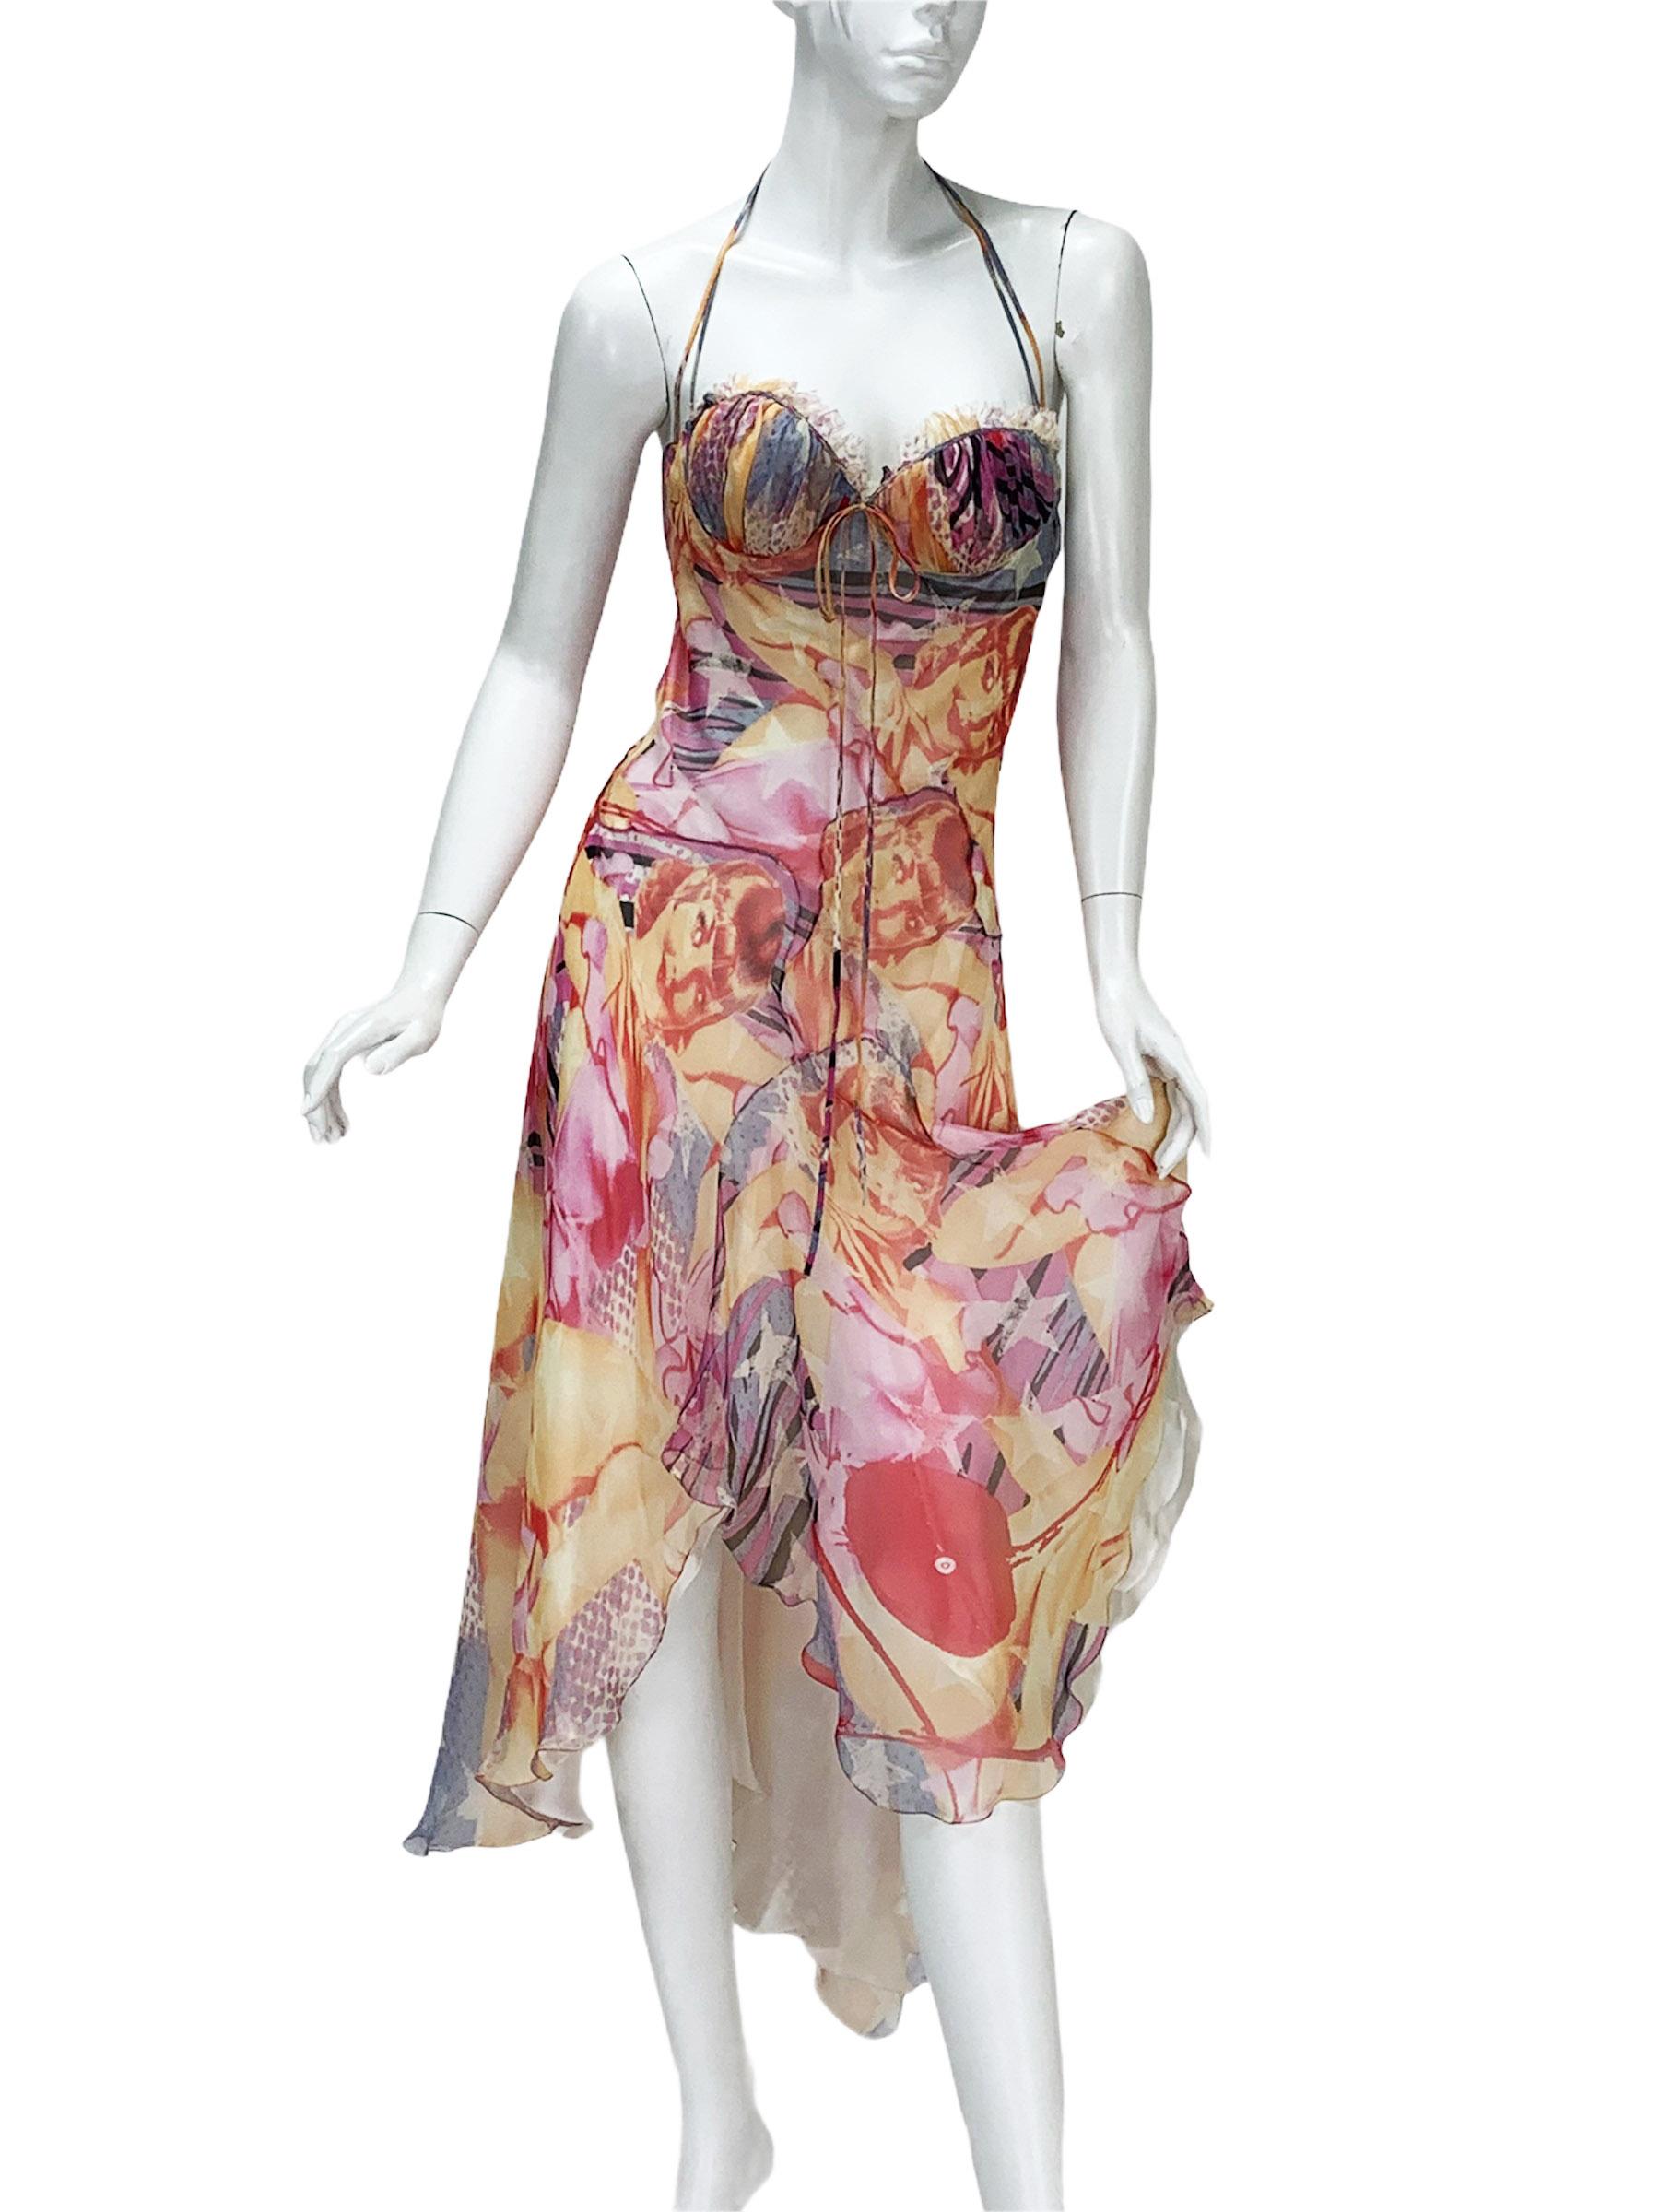 Alexander McQueen Silk Halter High-Low Unique Printed Dress
2003 Collection
Designer size - 38
92% Silk, 6% Nylon, 2% Spandex.
*Americana* Print, High-Low Style, Slip-On ( no zipper ), Build-in Cups, Bow-accent, Fully Lined.
Excellent Vintage